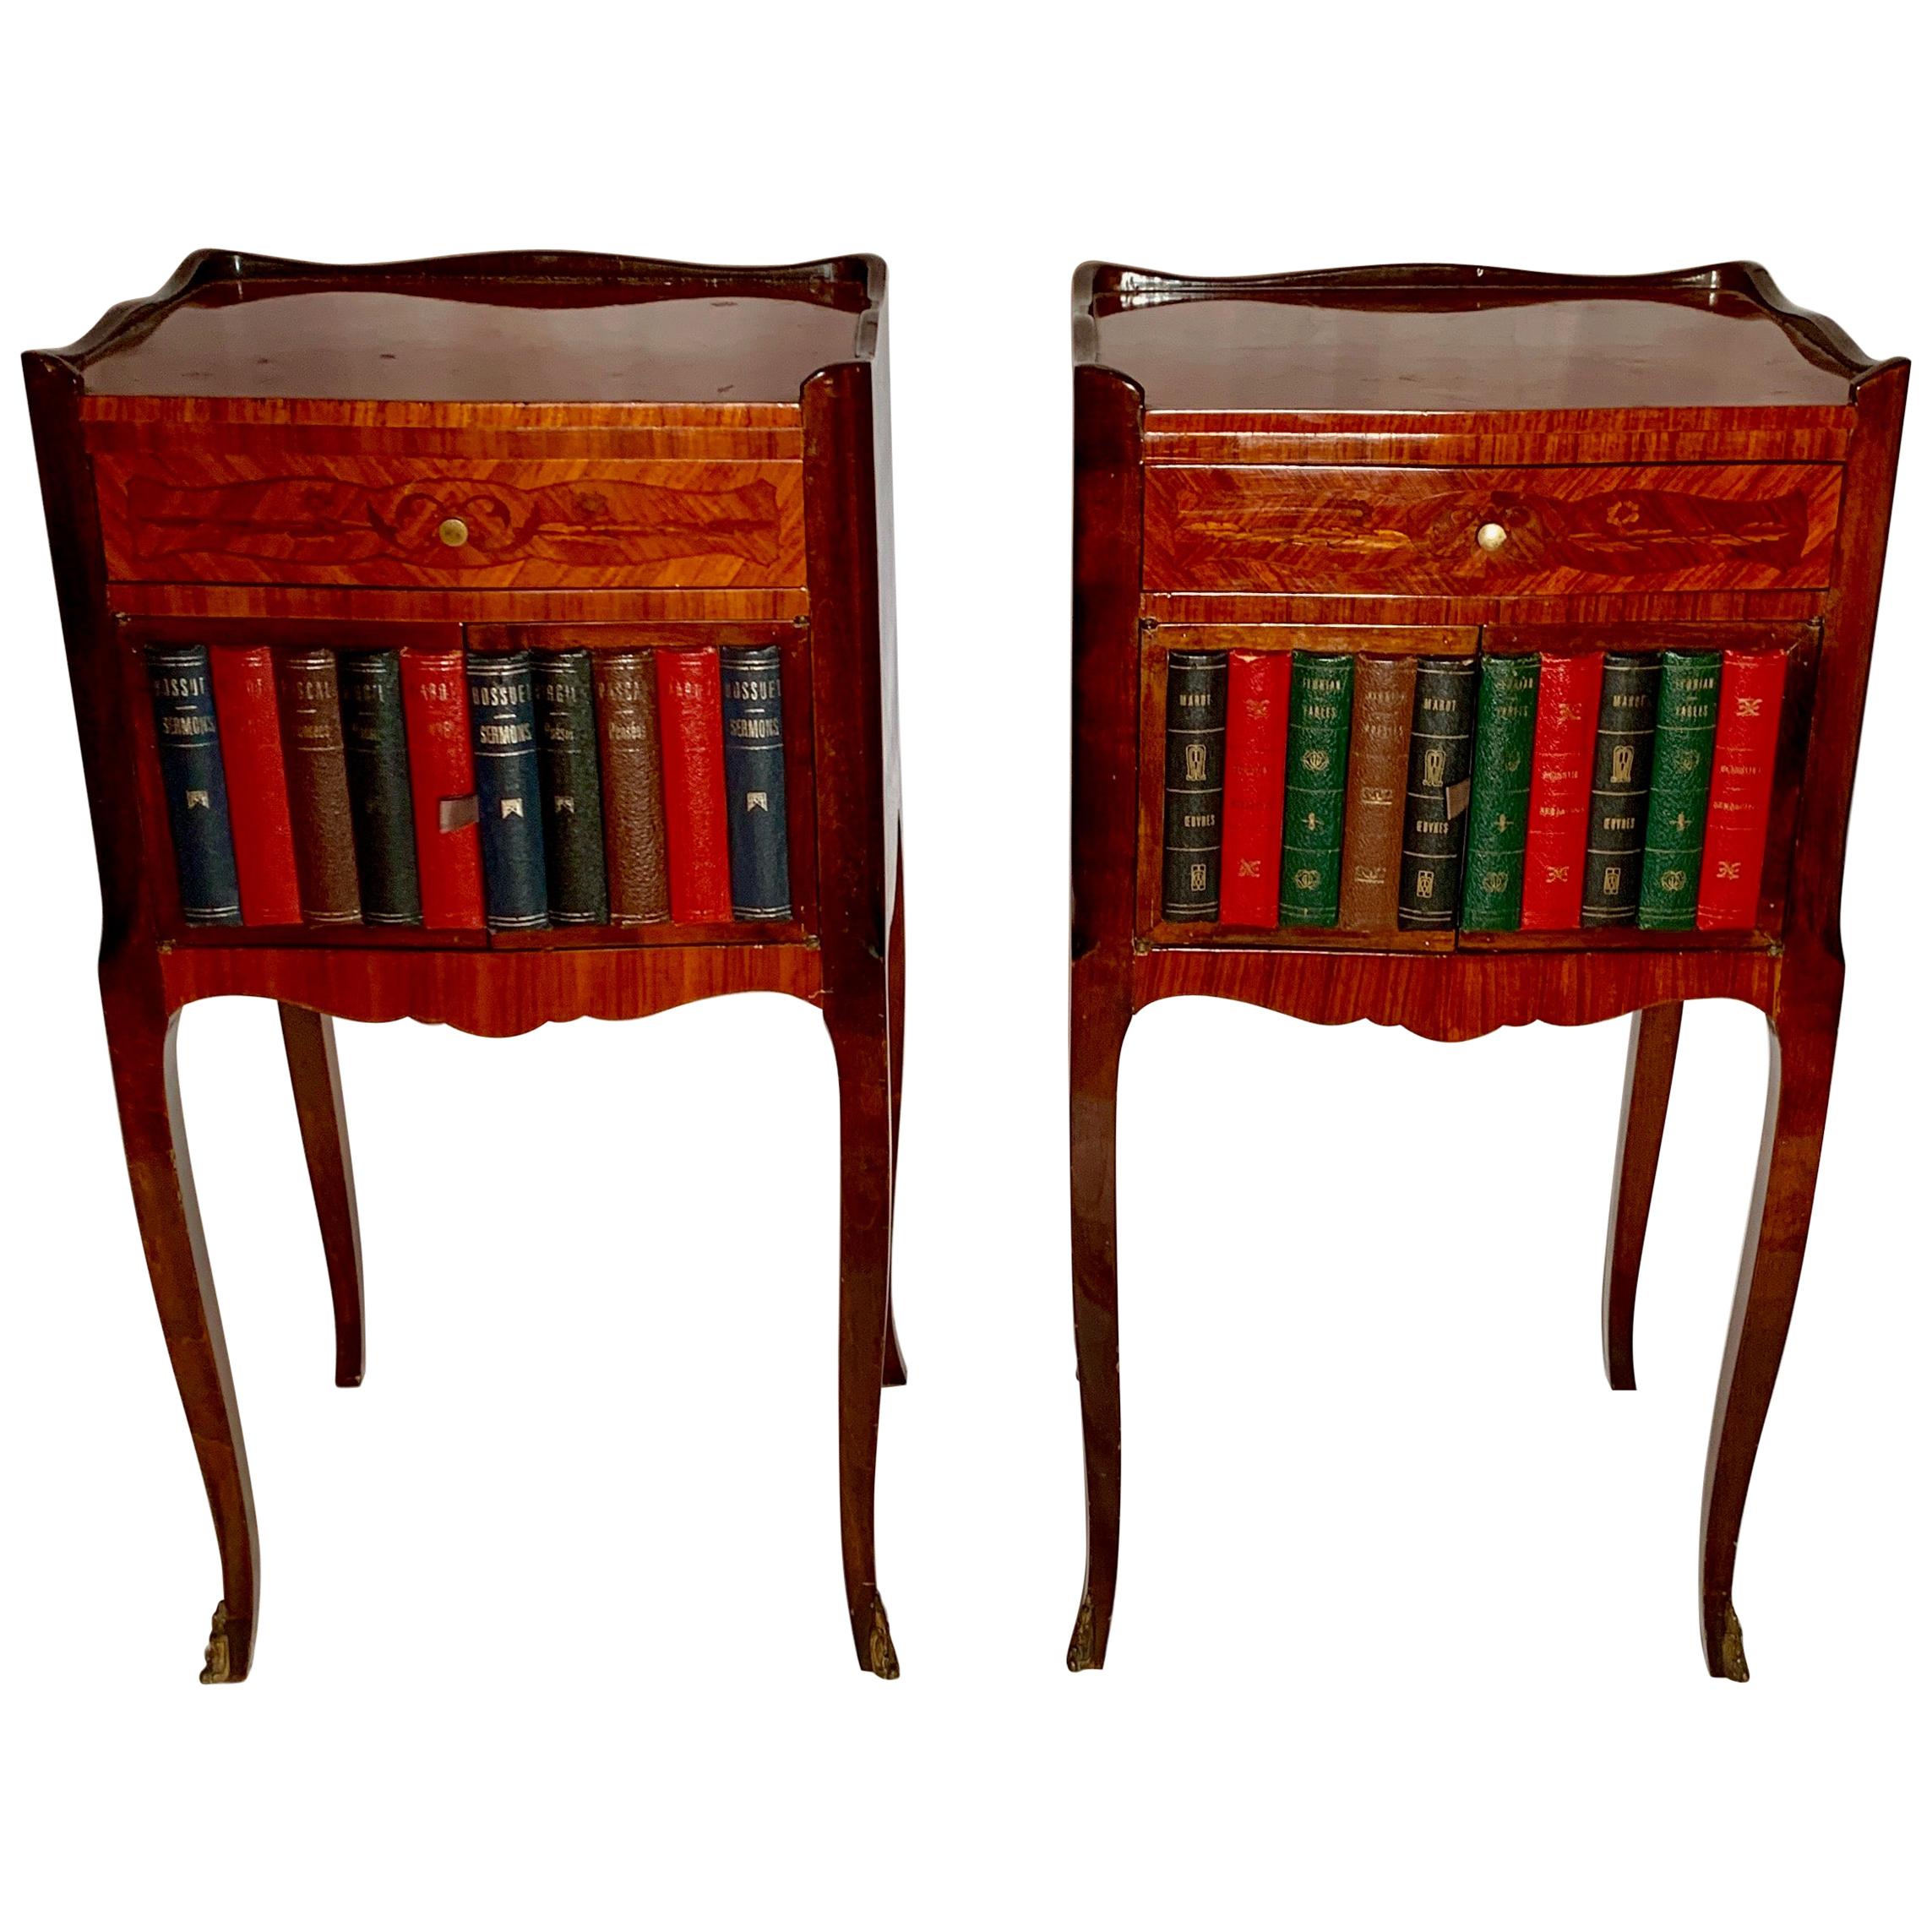 Pair of Antique French Occasional Tables, circa 1890